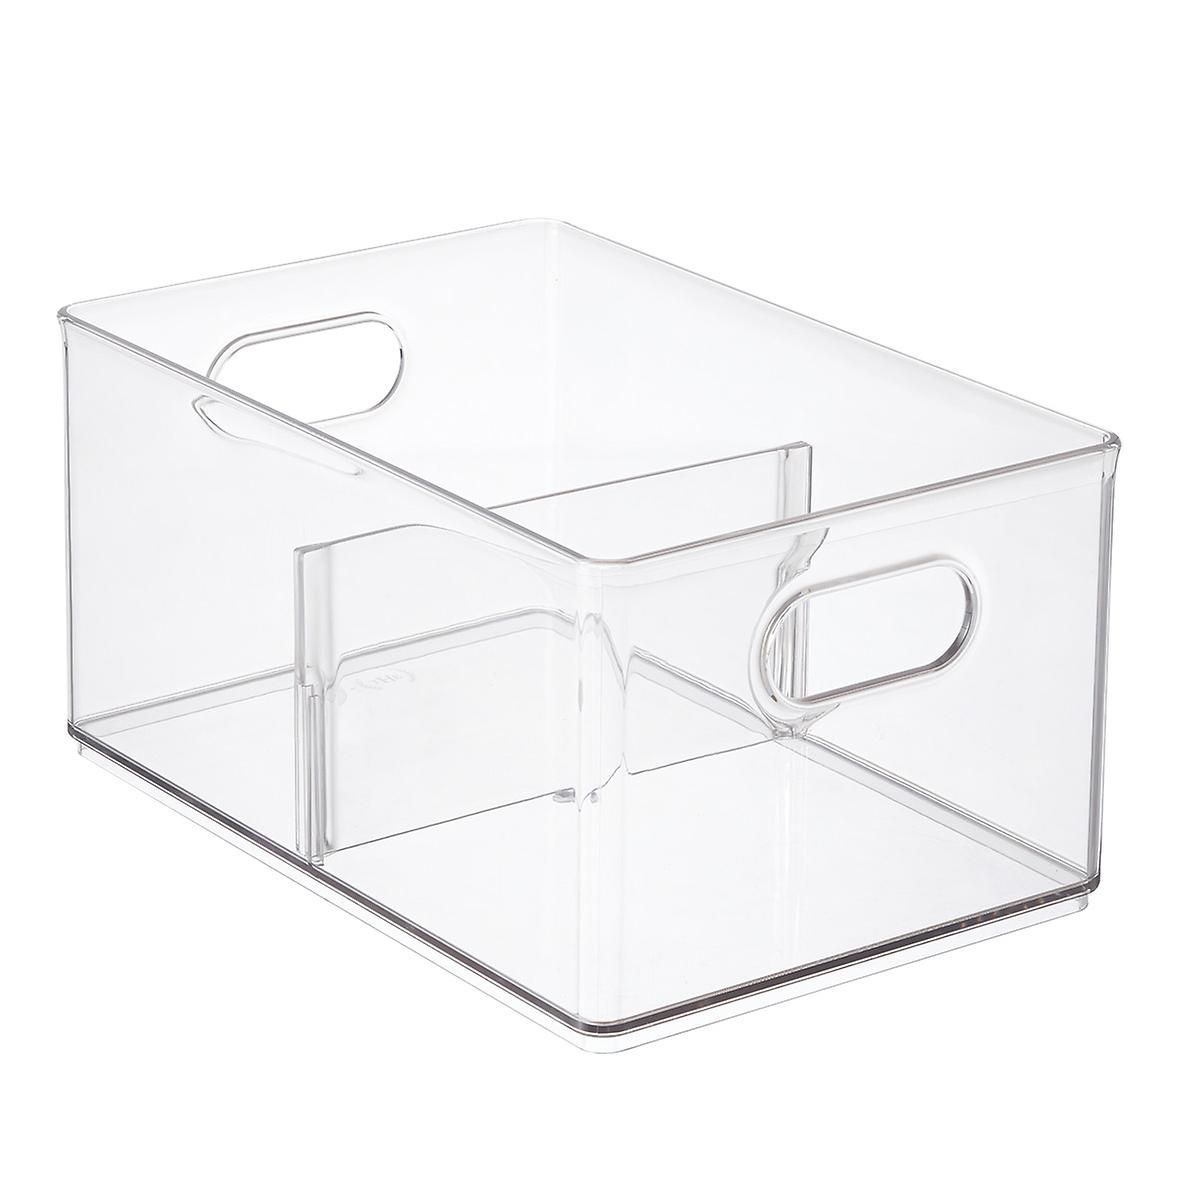 Case of 8 T.H.E. Divided Freezer Bin | The Container Store